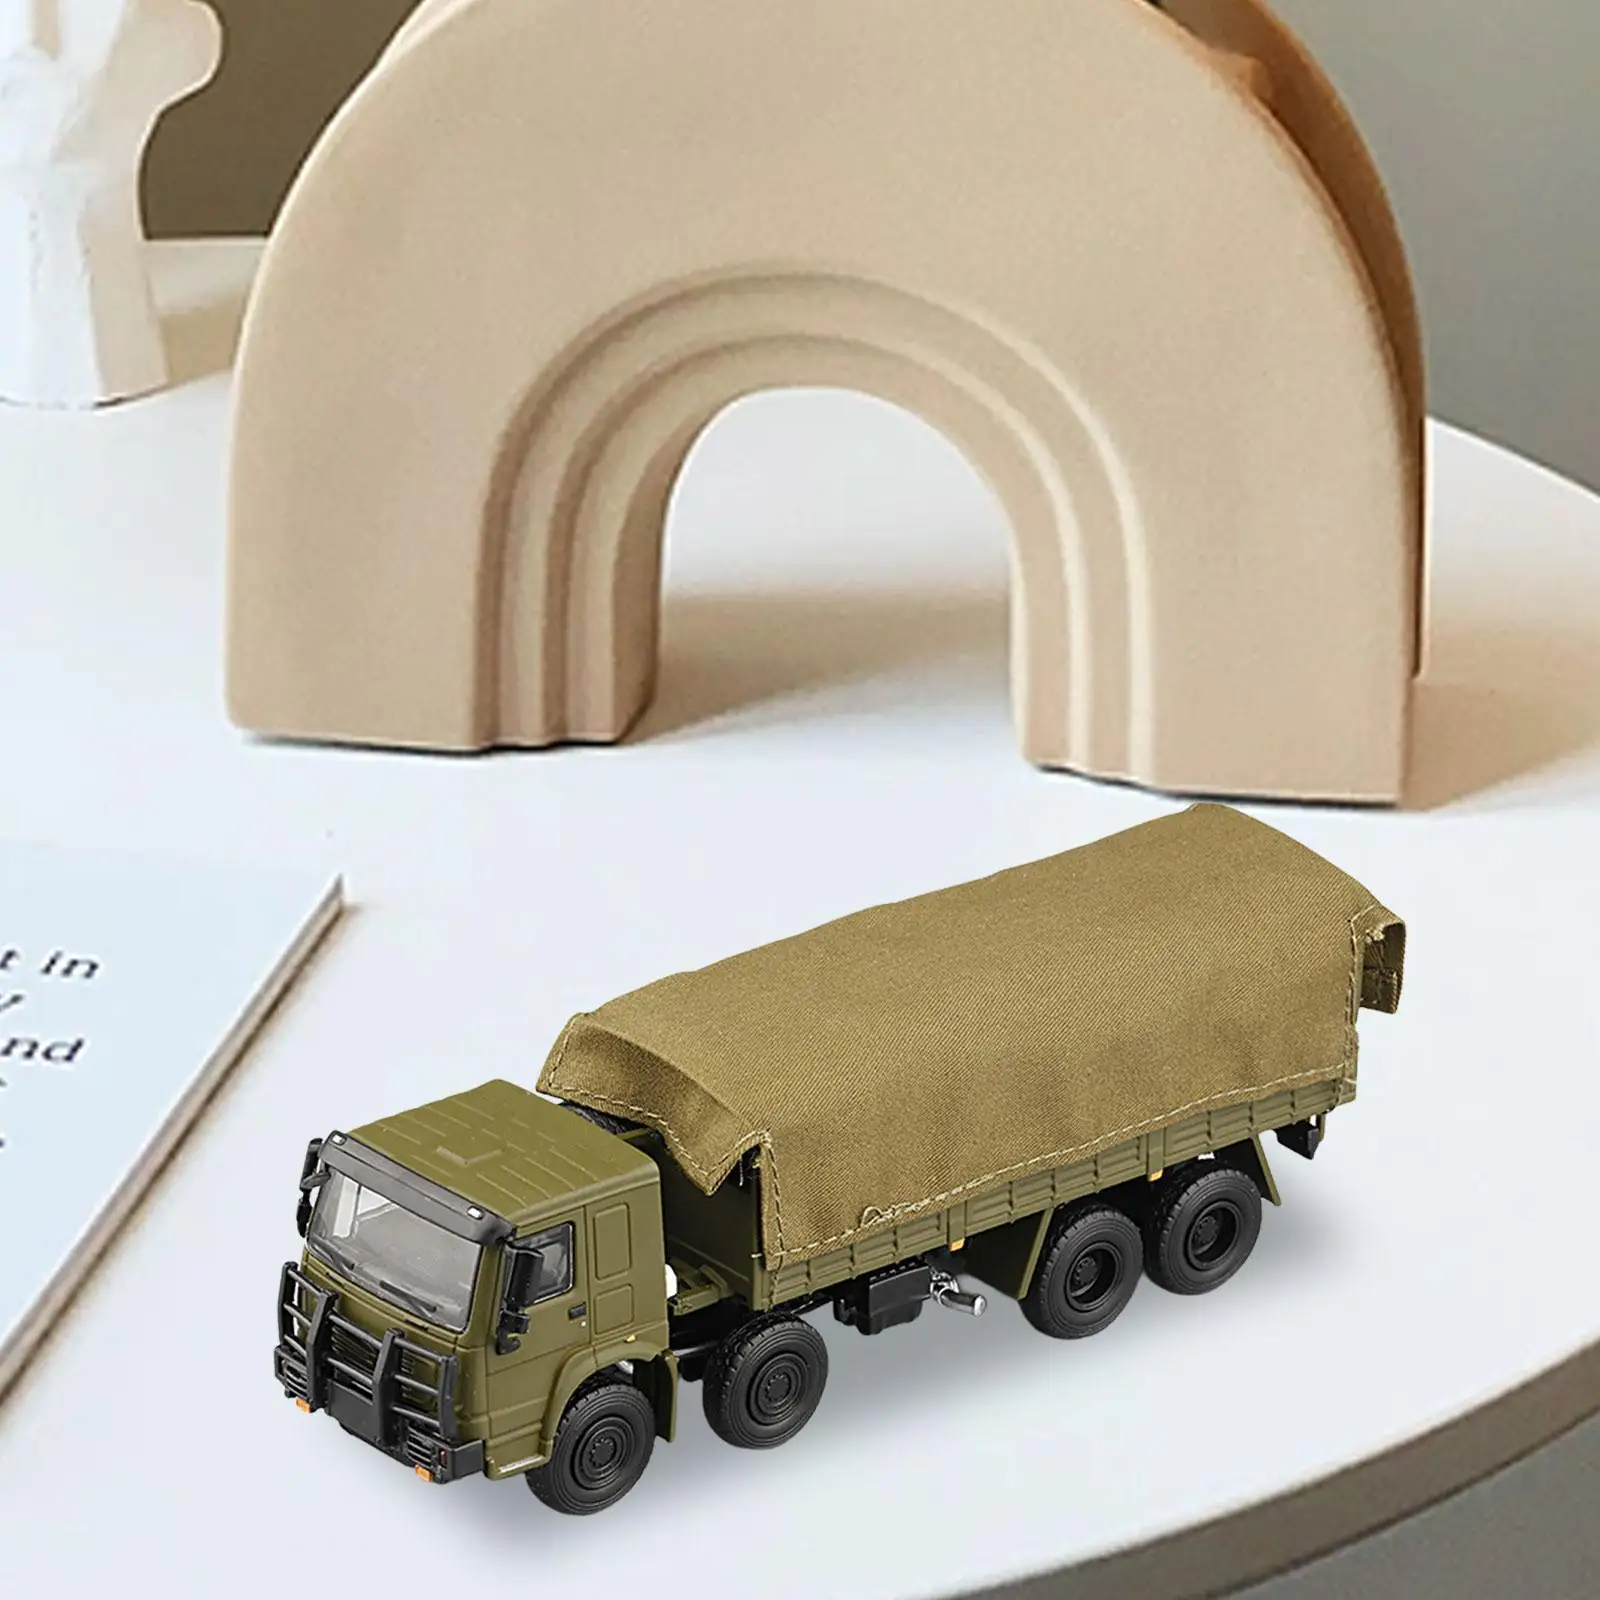 1/64 Diecast Model Car Truck Children Gifts Alloy Classic Car Model for Photography Props Diorama Micro Landscapes Accessories